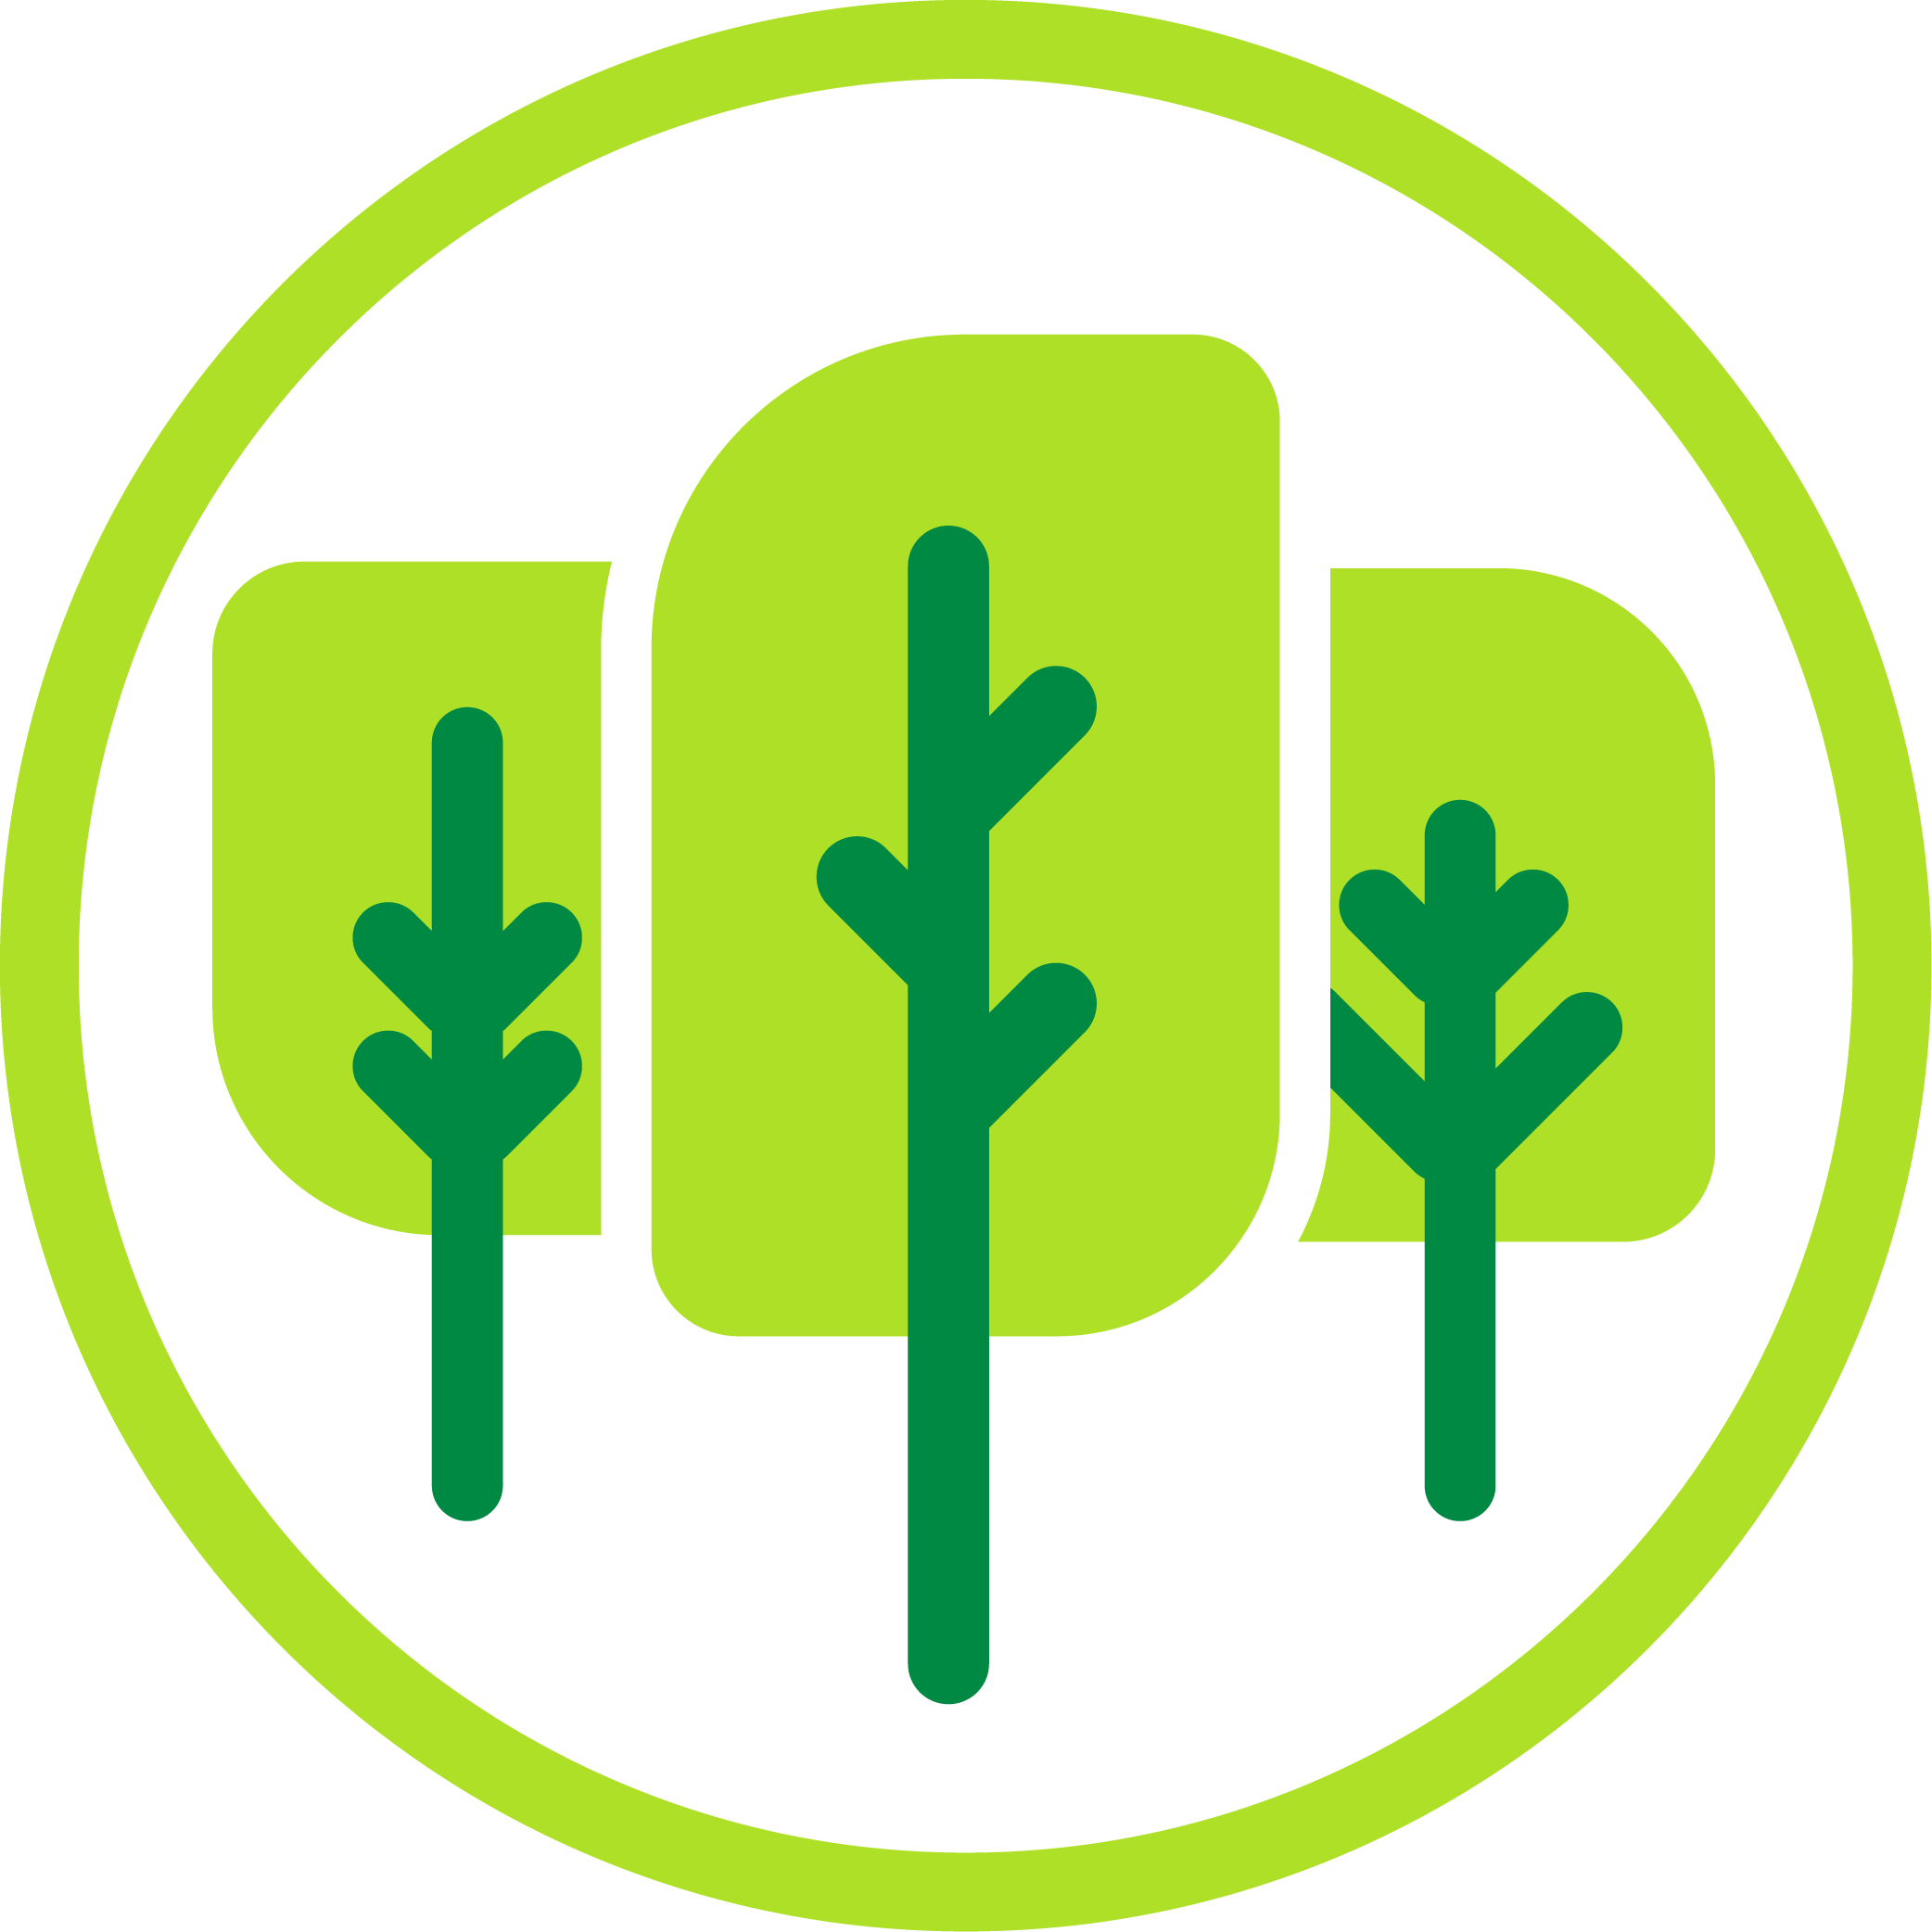 Icon of three ascending green trees, reflecting community tree planting initiative.